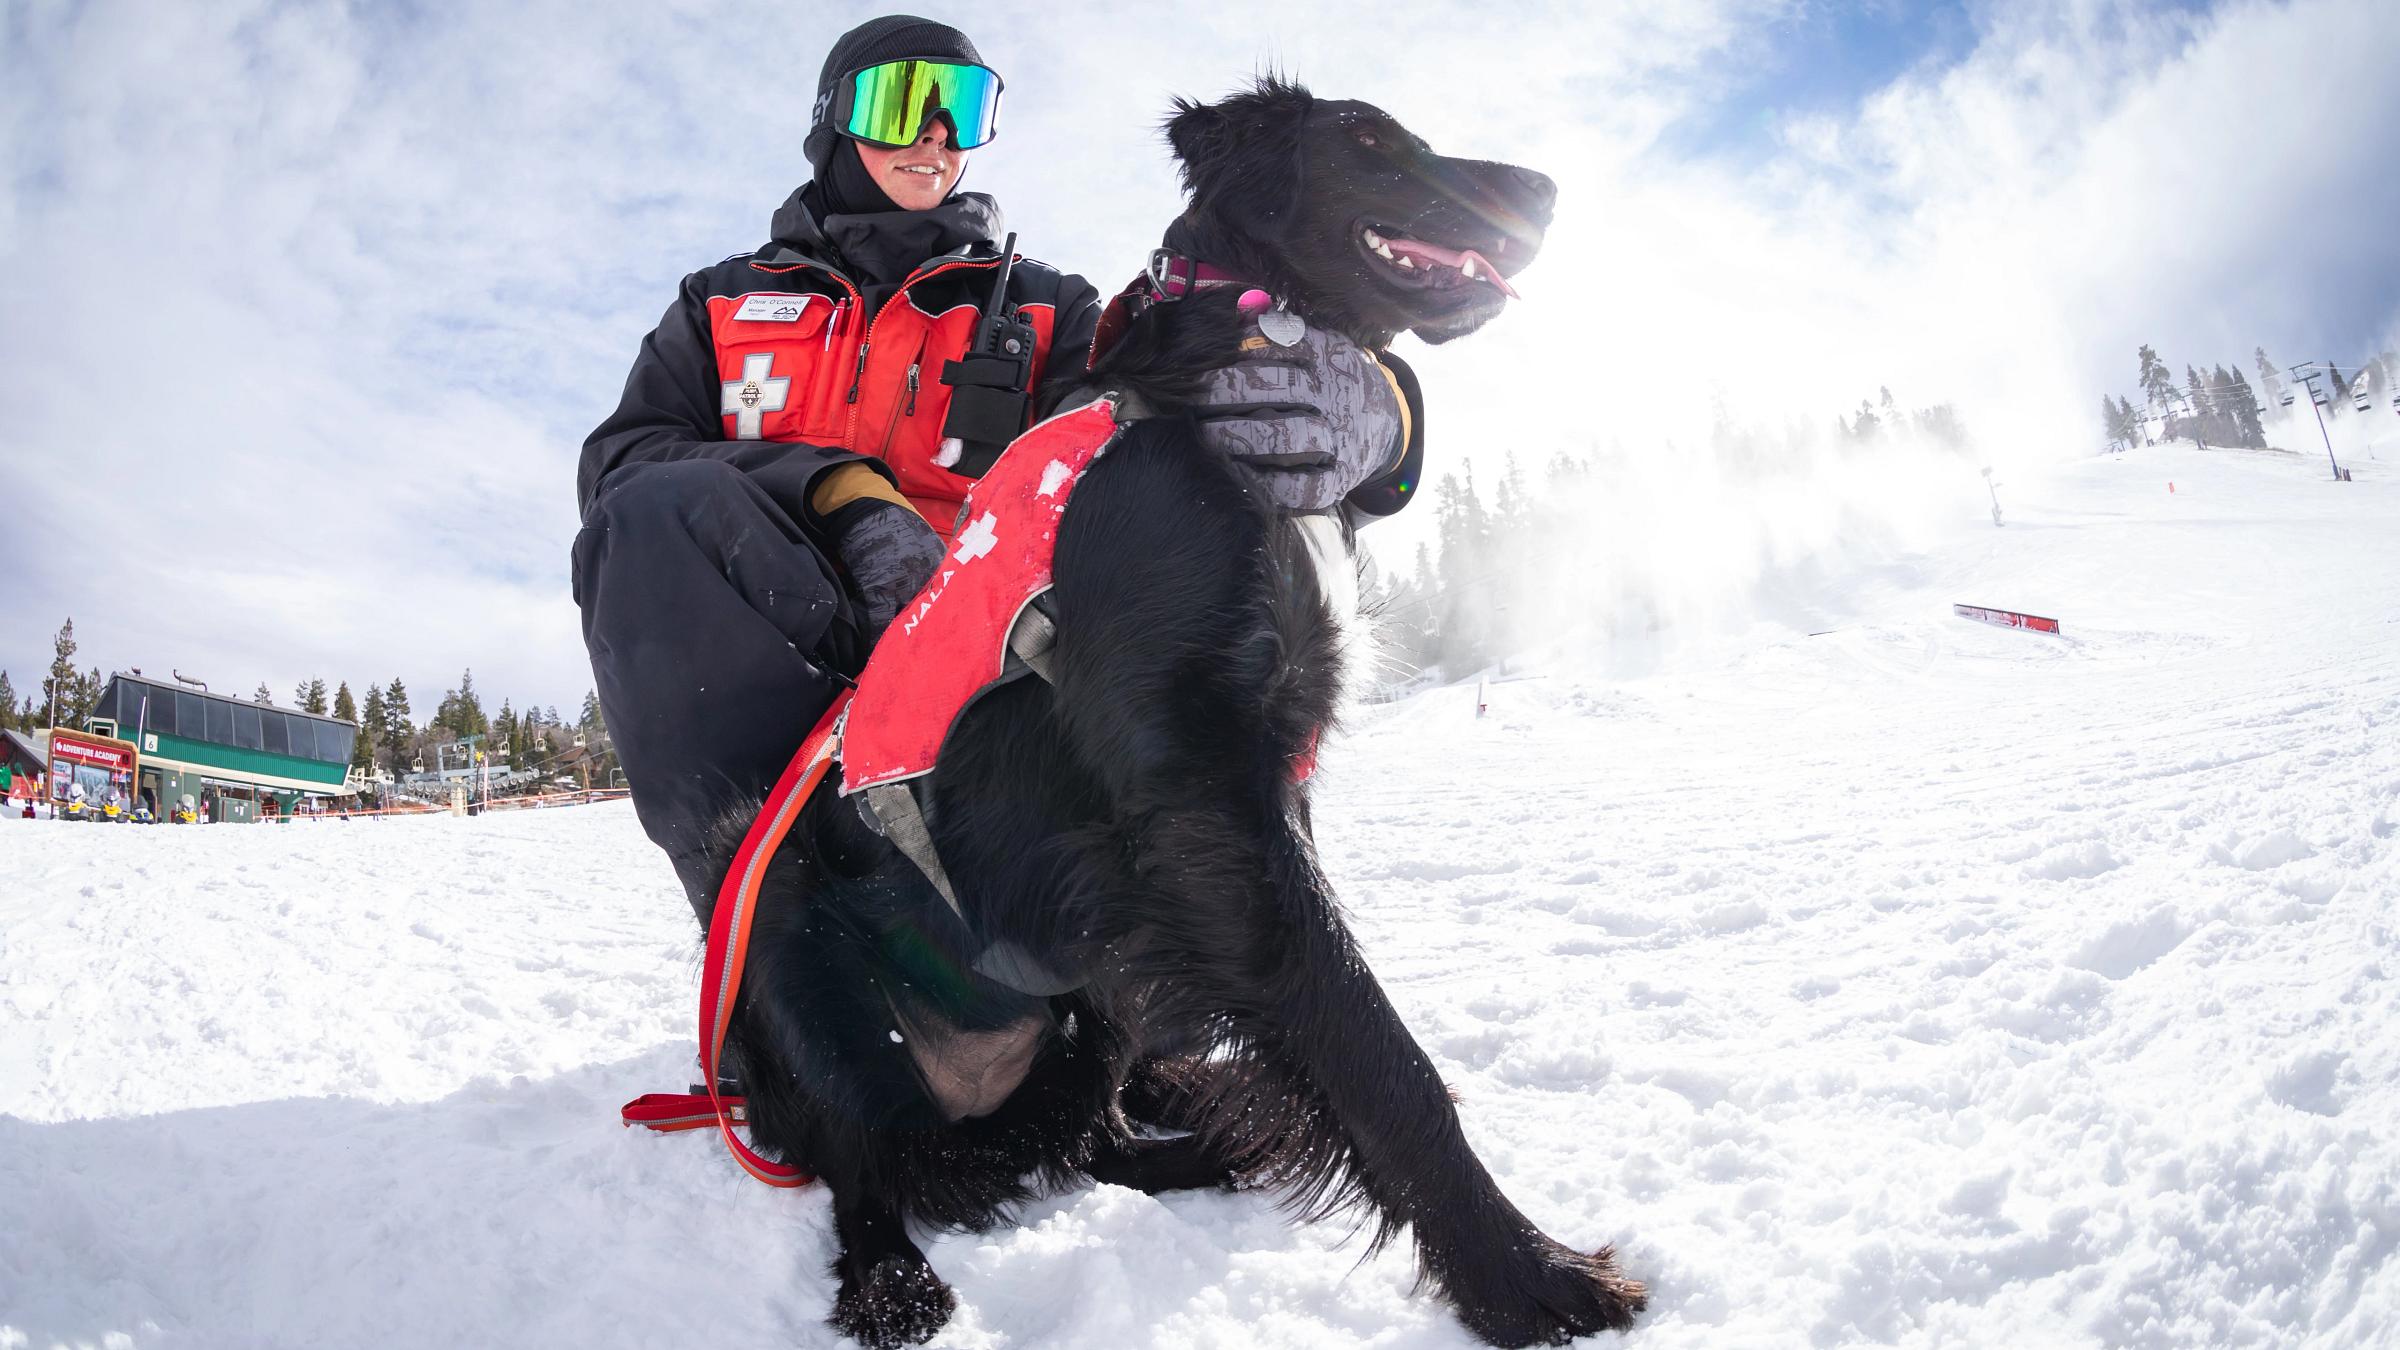 Patrol with an avalanche dog in training